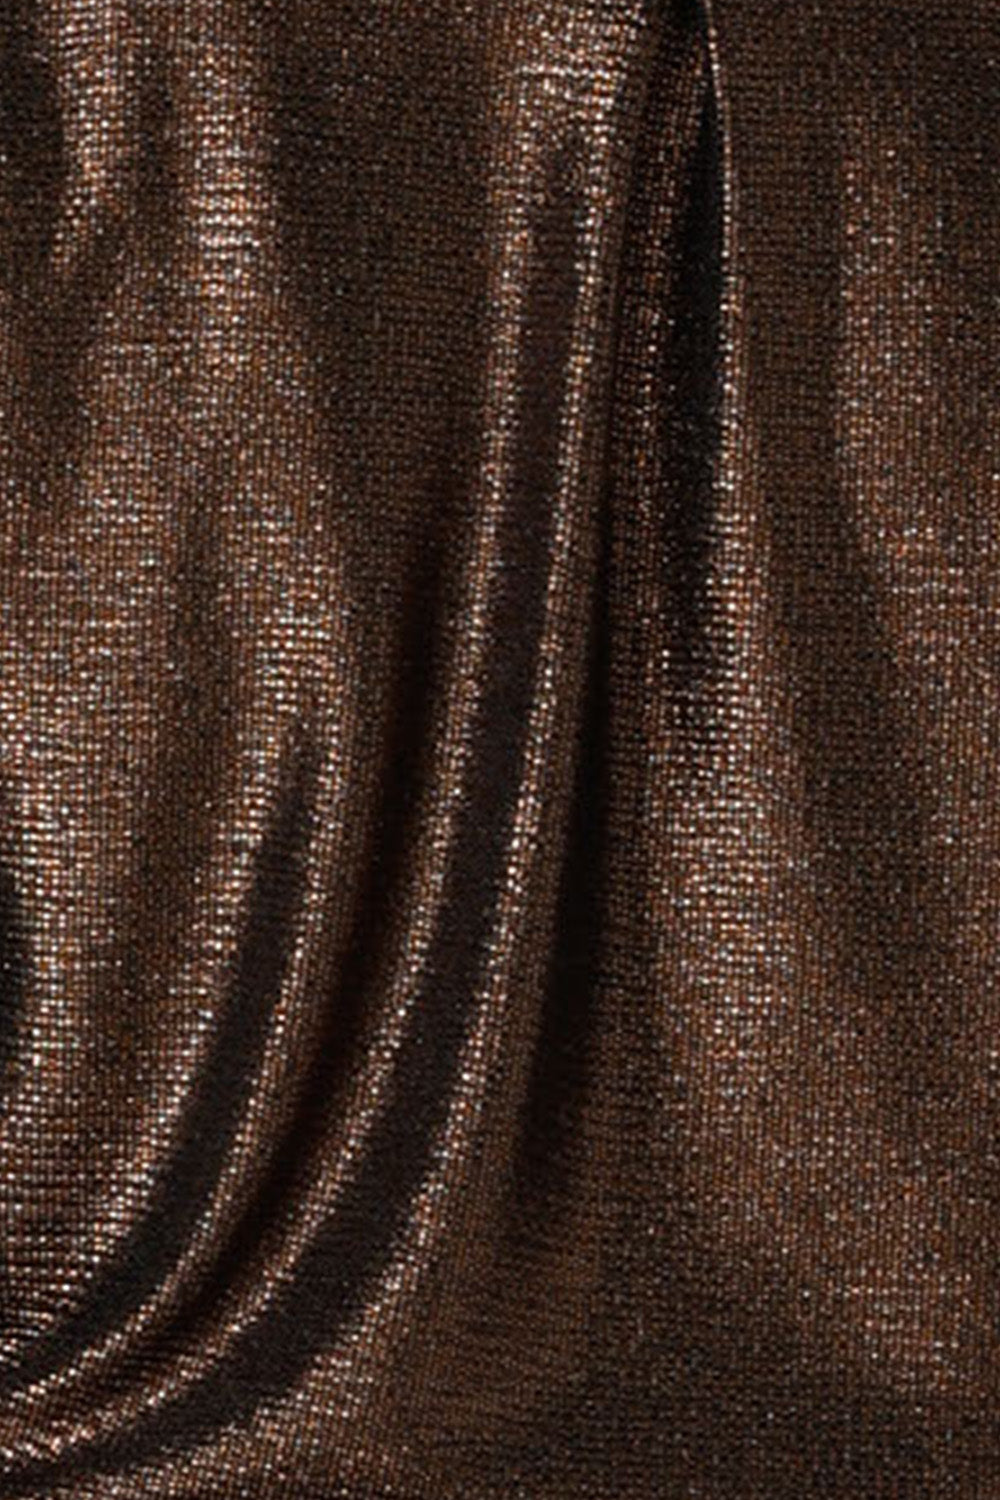 fabric swatch of Mocha Xanadu, a shimmering jersey fabric in shades of copper and brown, this sparkly fabric is used by Australian and New Zealand women's fashion brand, L&F to make evening tops and skirts in their new occasionwear collection.